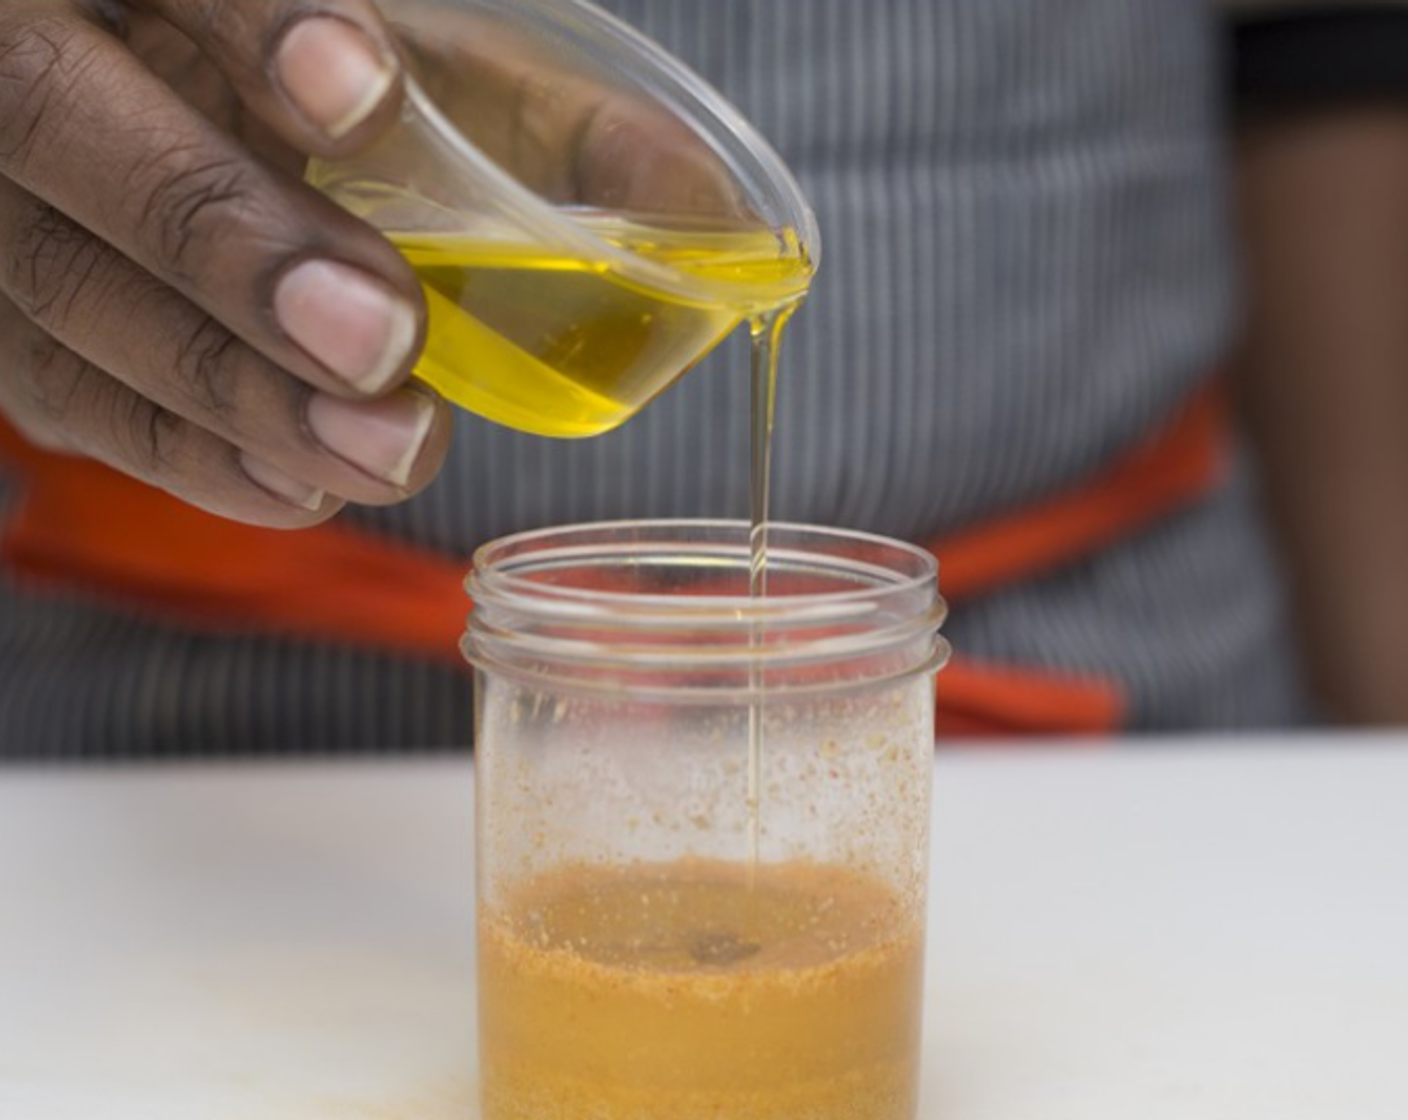 step 3 Make the dressing: To the Apple Cider Vinegar (to taste) jar add Olive Oil (2 Tbsp), Water (1 Tbsp), Nutritional Yeast (to taste), Ground Turmeric (to taste), Spicy Brown Mustard (to taste), Salt (1/2 tsp). Cover tightly, and shake well to thoroughly combine.